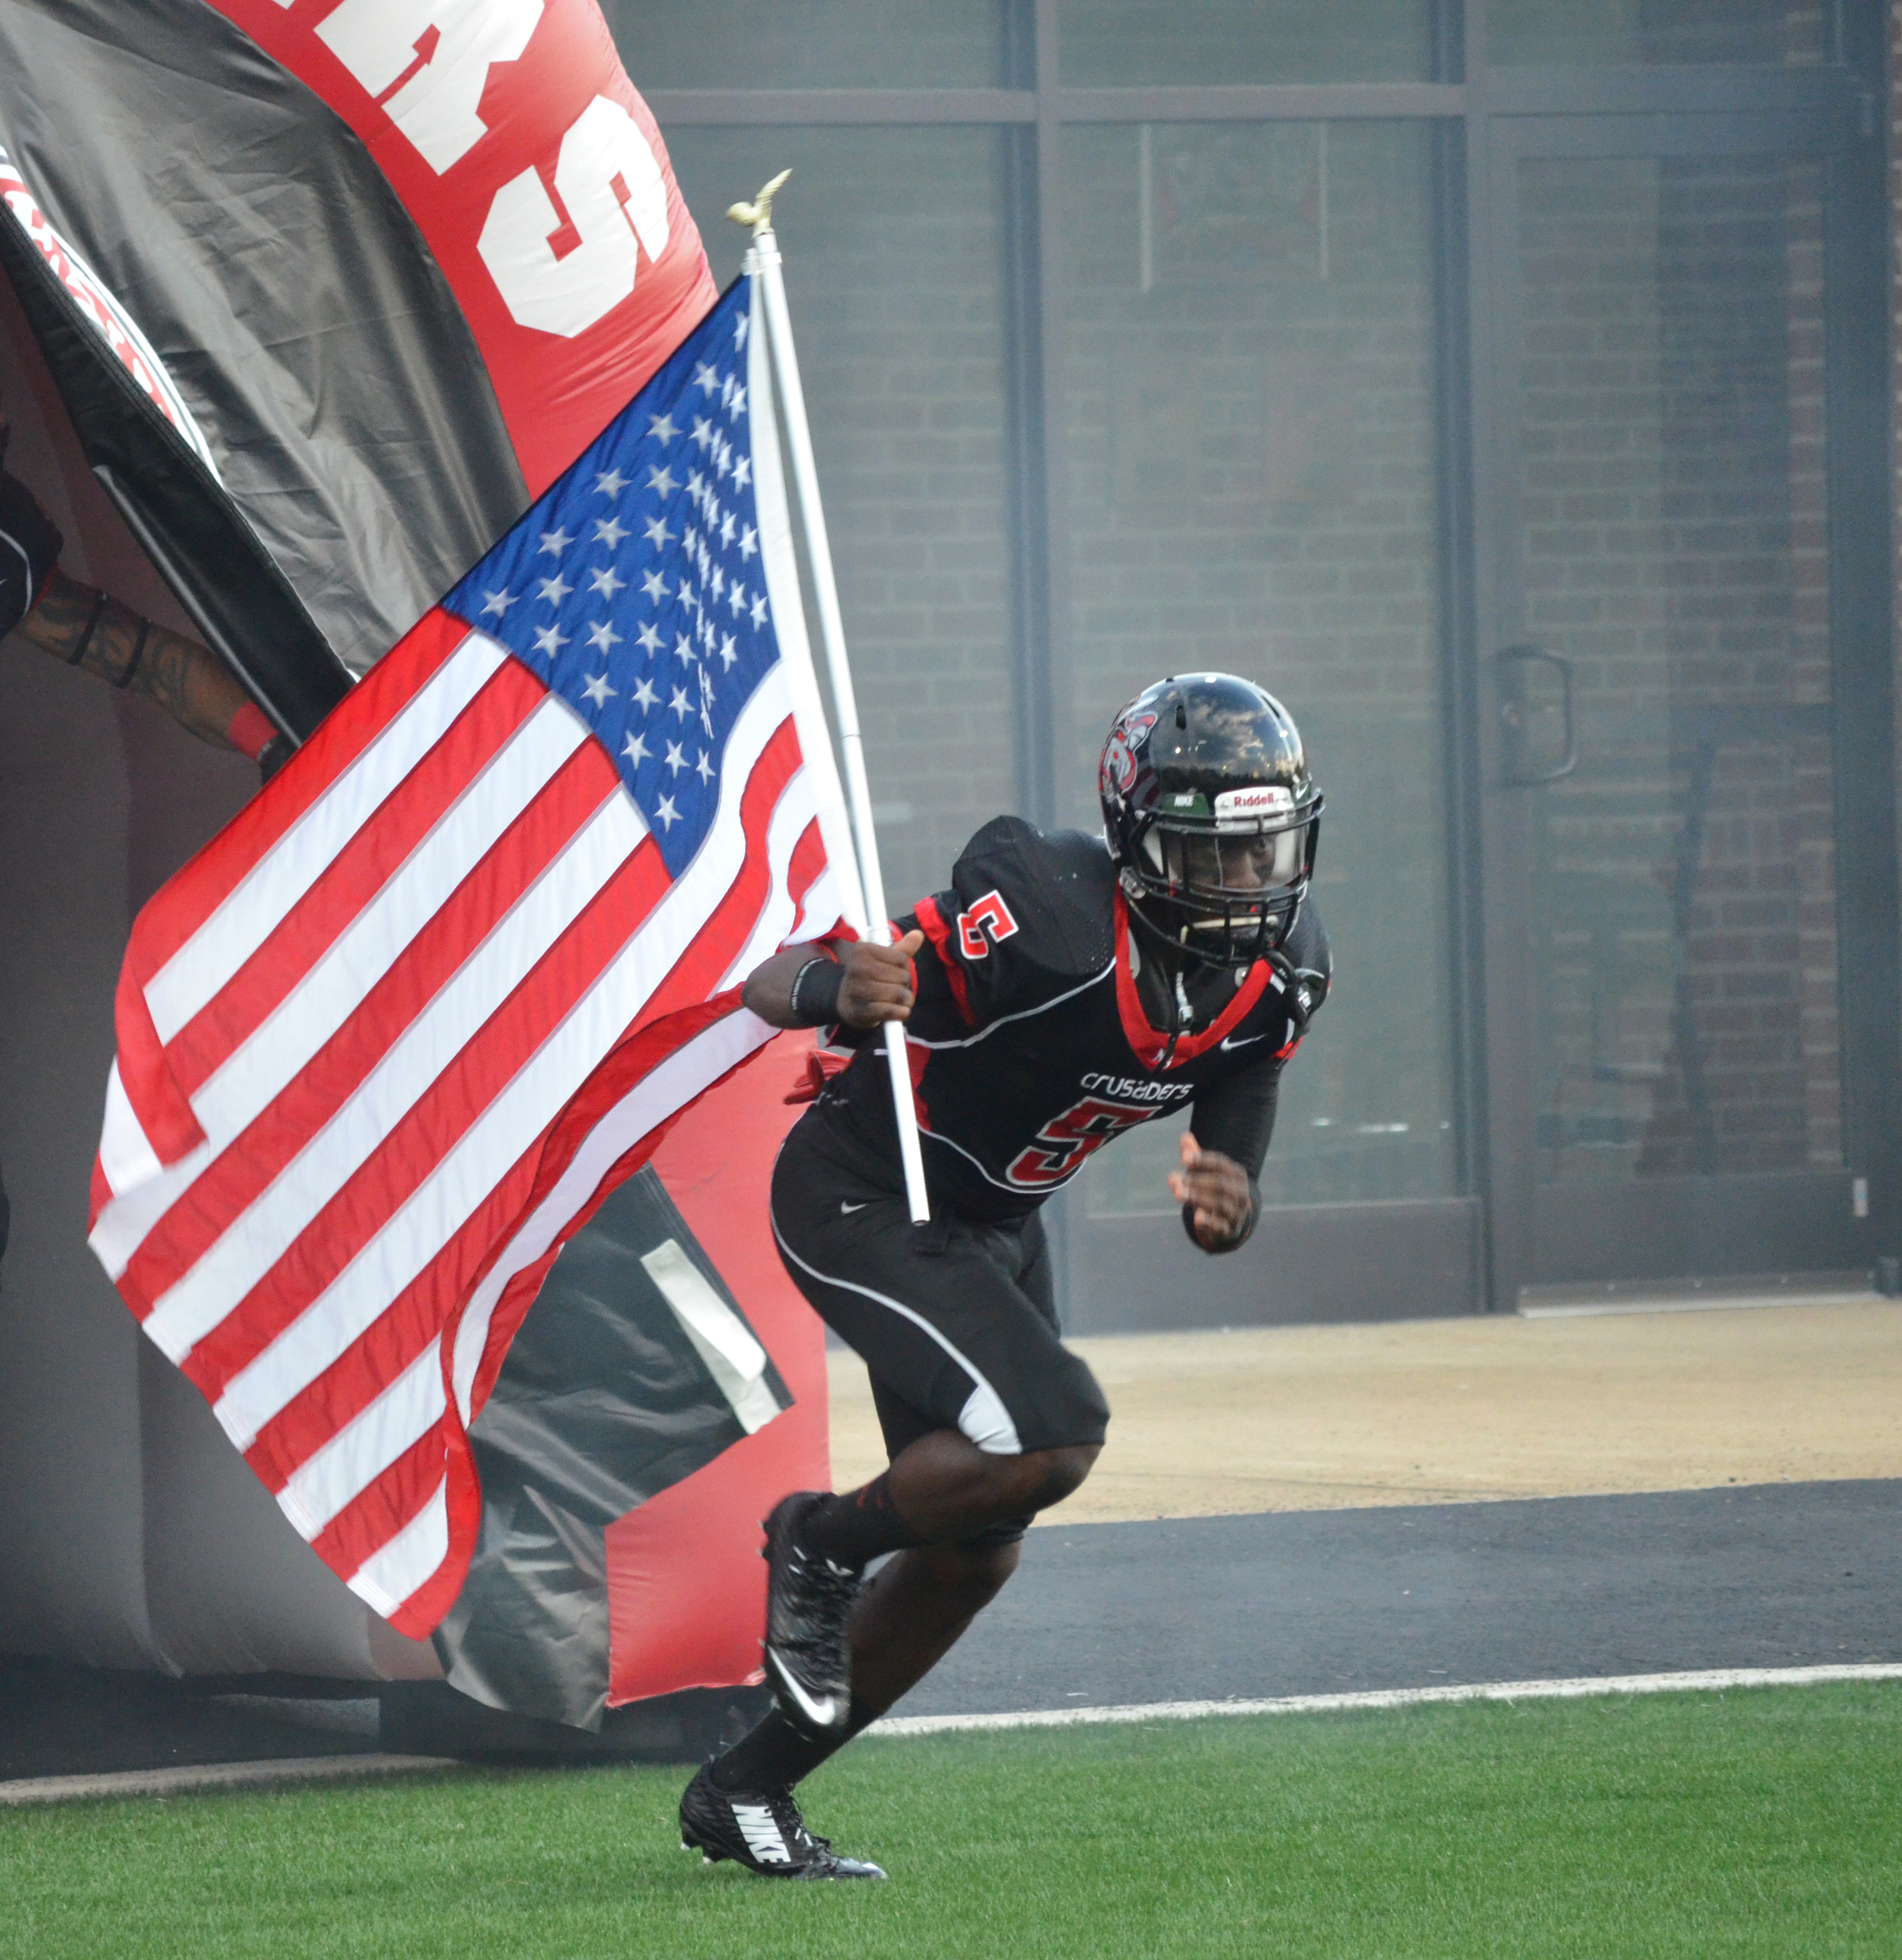  Player #5, Quantel Mack, starts off the game by charging out of the tunnel while carrying the American flag 